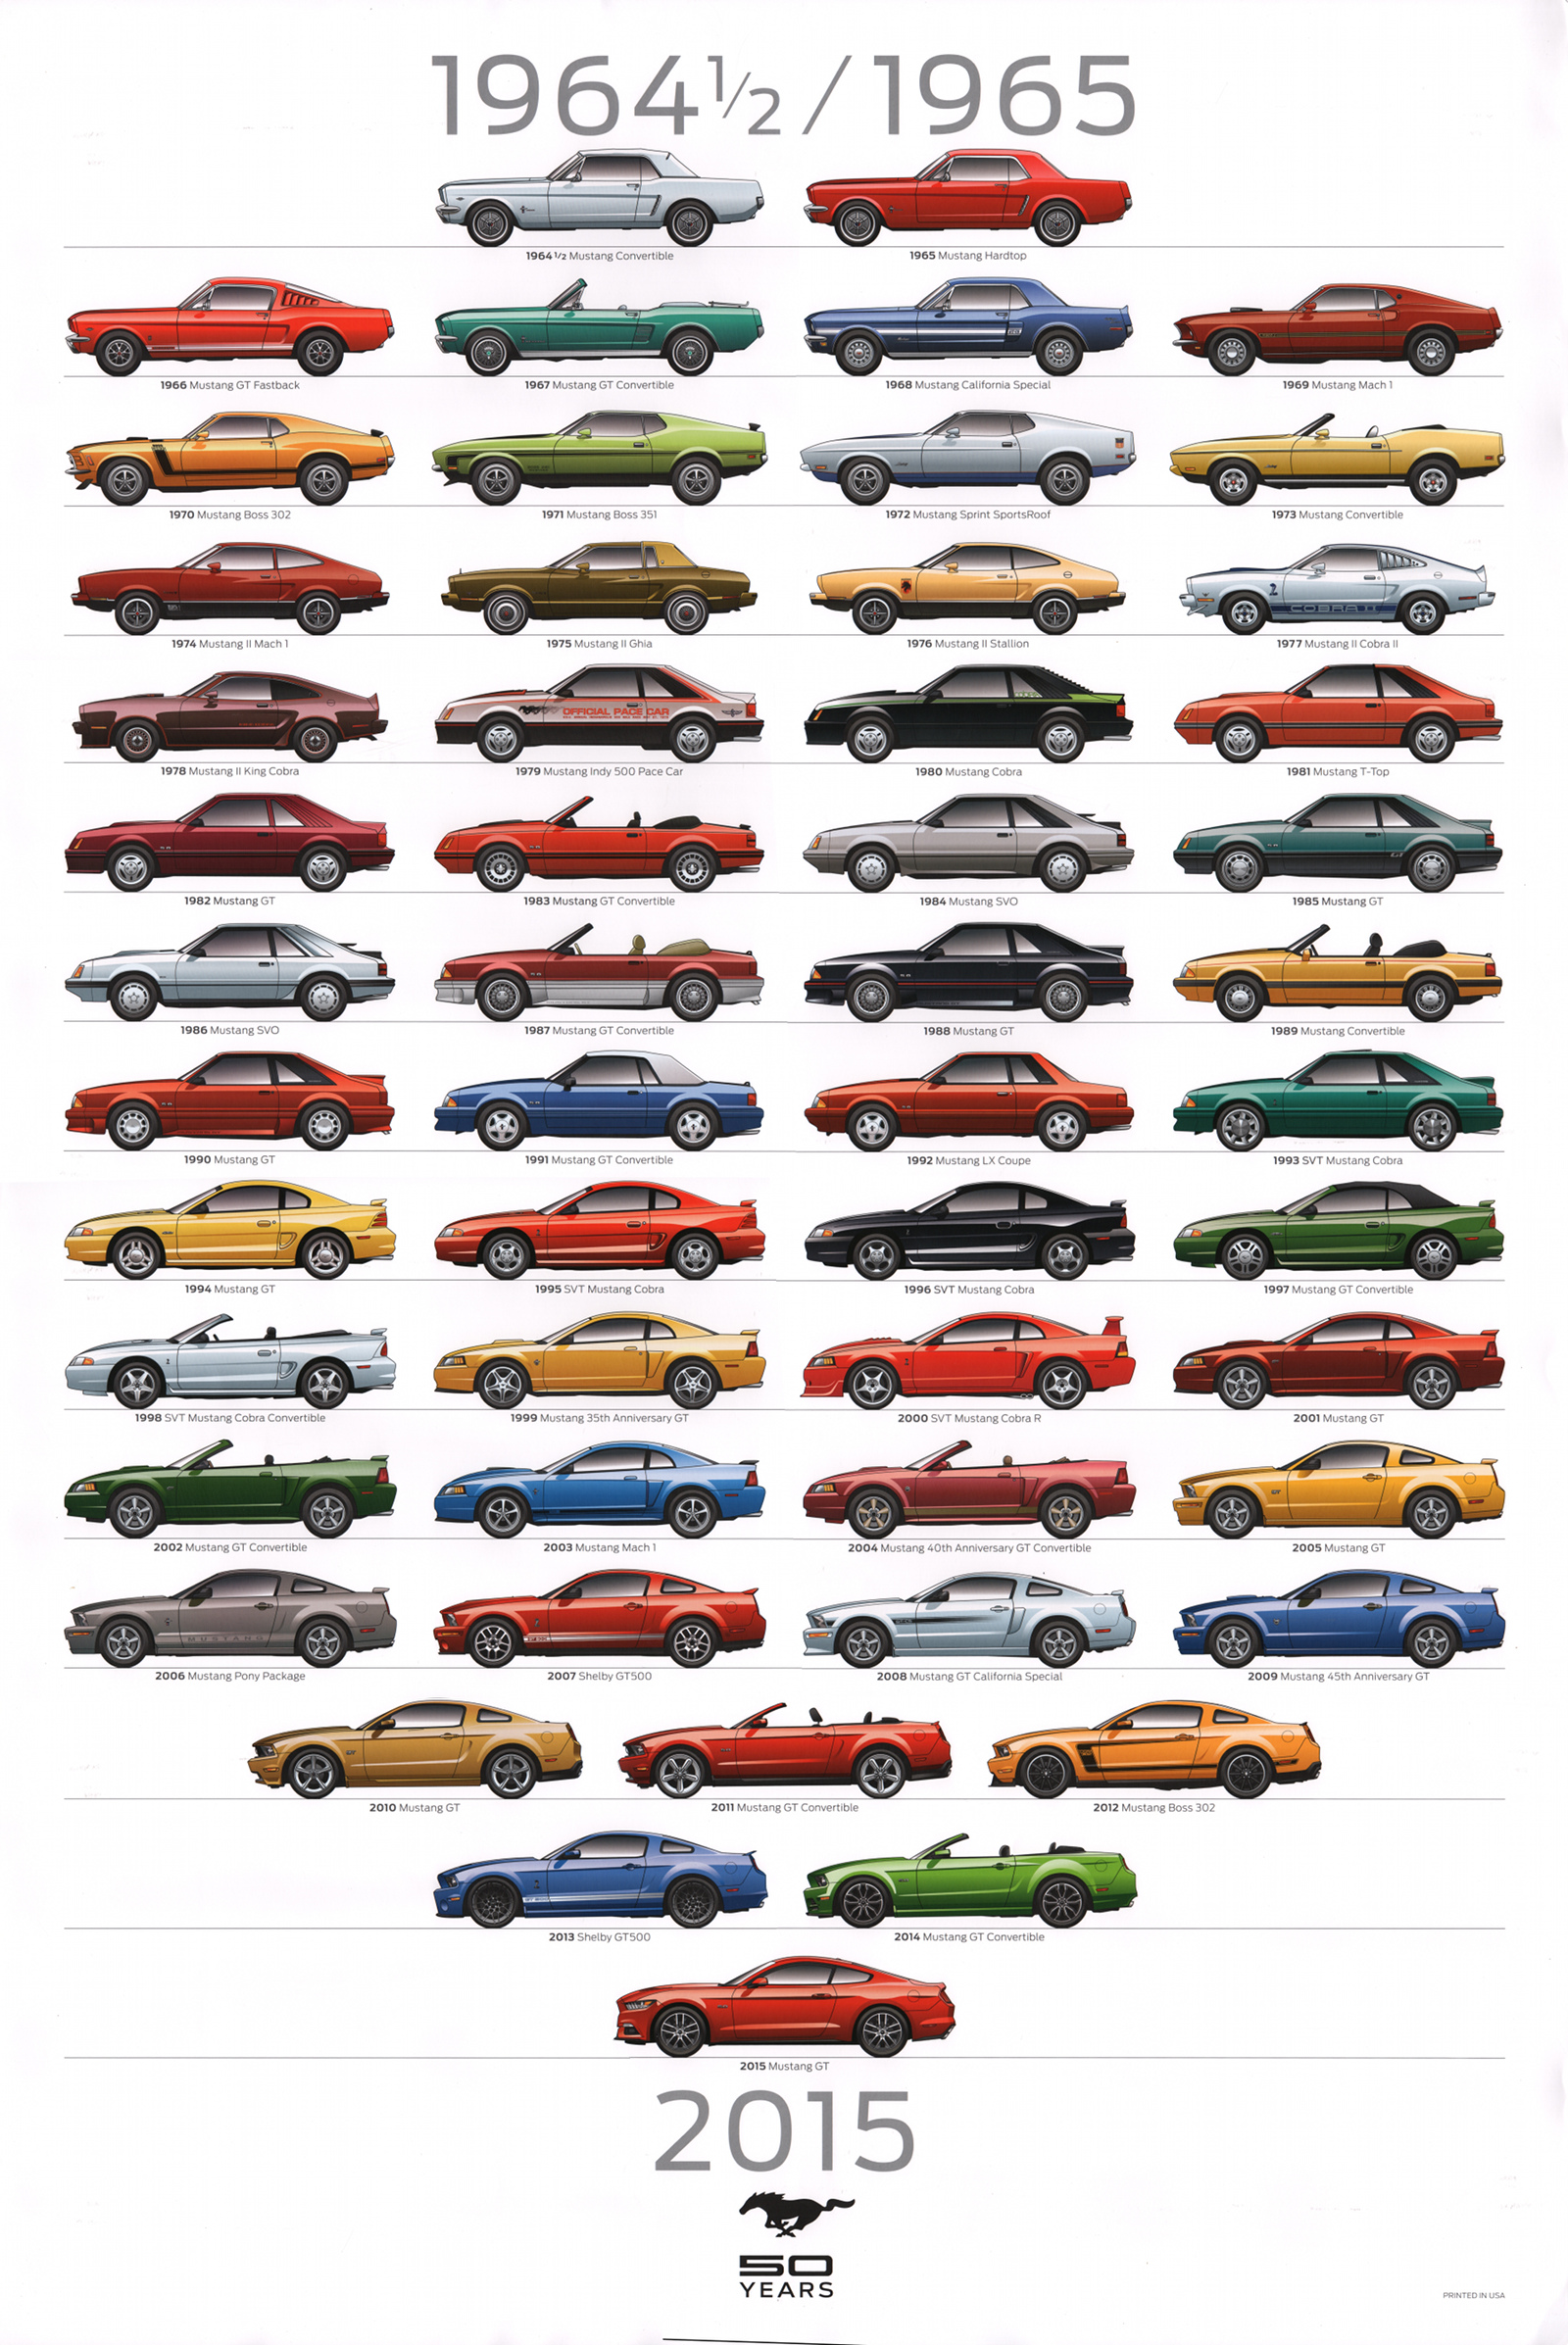 Mustang 50th Anniversary Poster